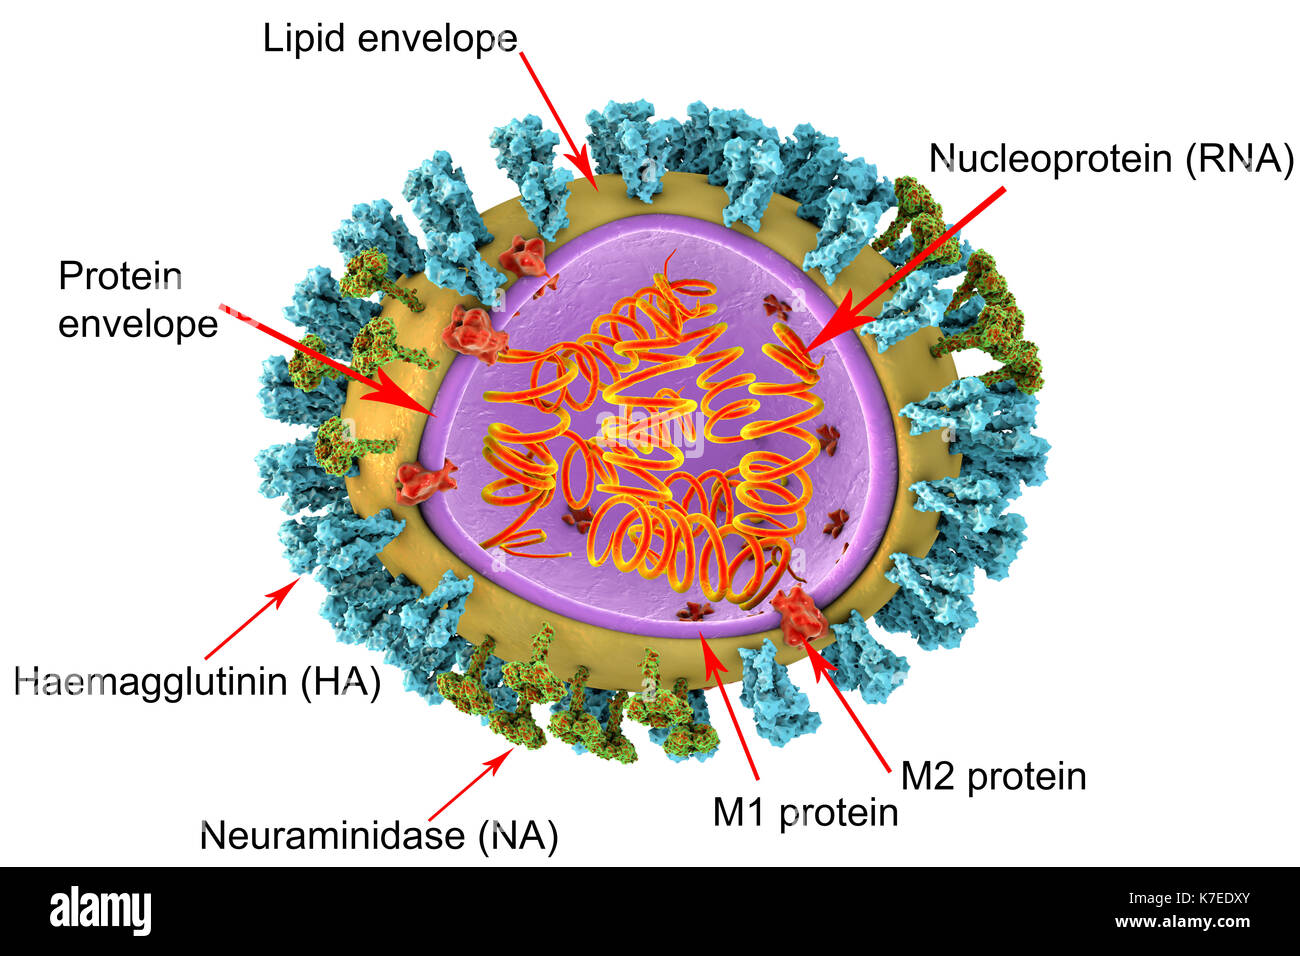 3D illustration of influenza virus particle structure. The virus consists of a ribonucleic acid (RNA, orange coils) core, surrounded by a nucleocapsid (purple) and a lipid envelope (yellow). Spanning the capsid and envelope are M2 proteins (red), that act as proton pumps. In the envelope are two types of protein spike, hemagglutinin (H, blue) and neuraminidase (N, green), which determine the strain of virus. Stock Photo